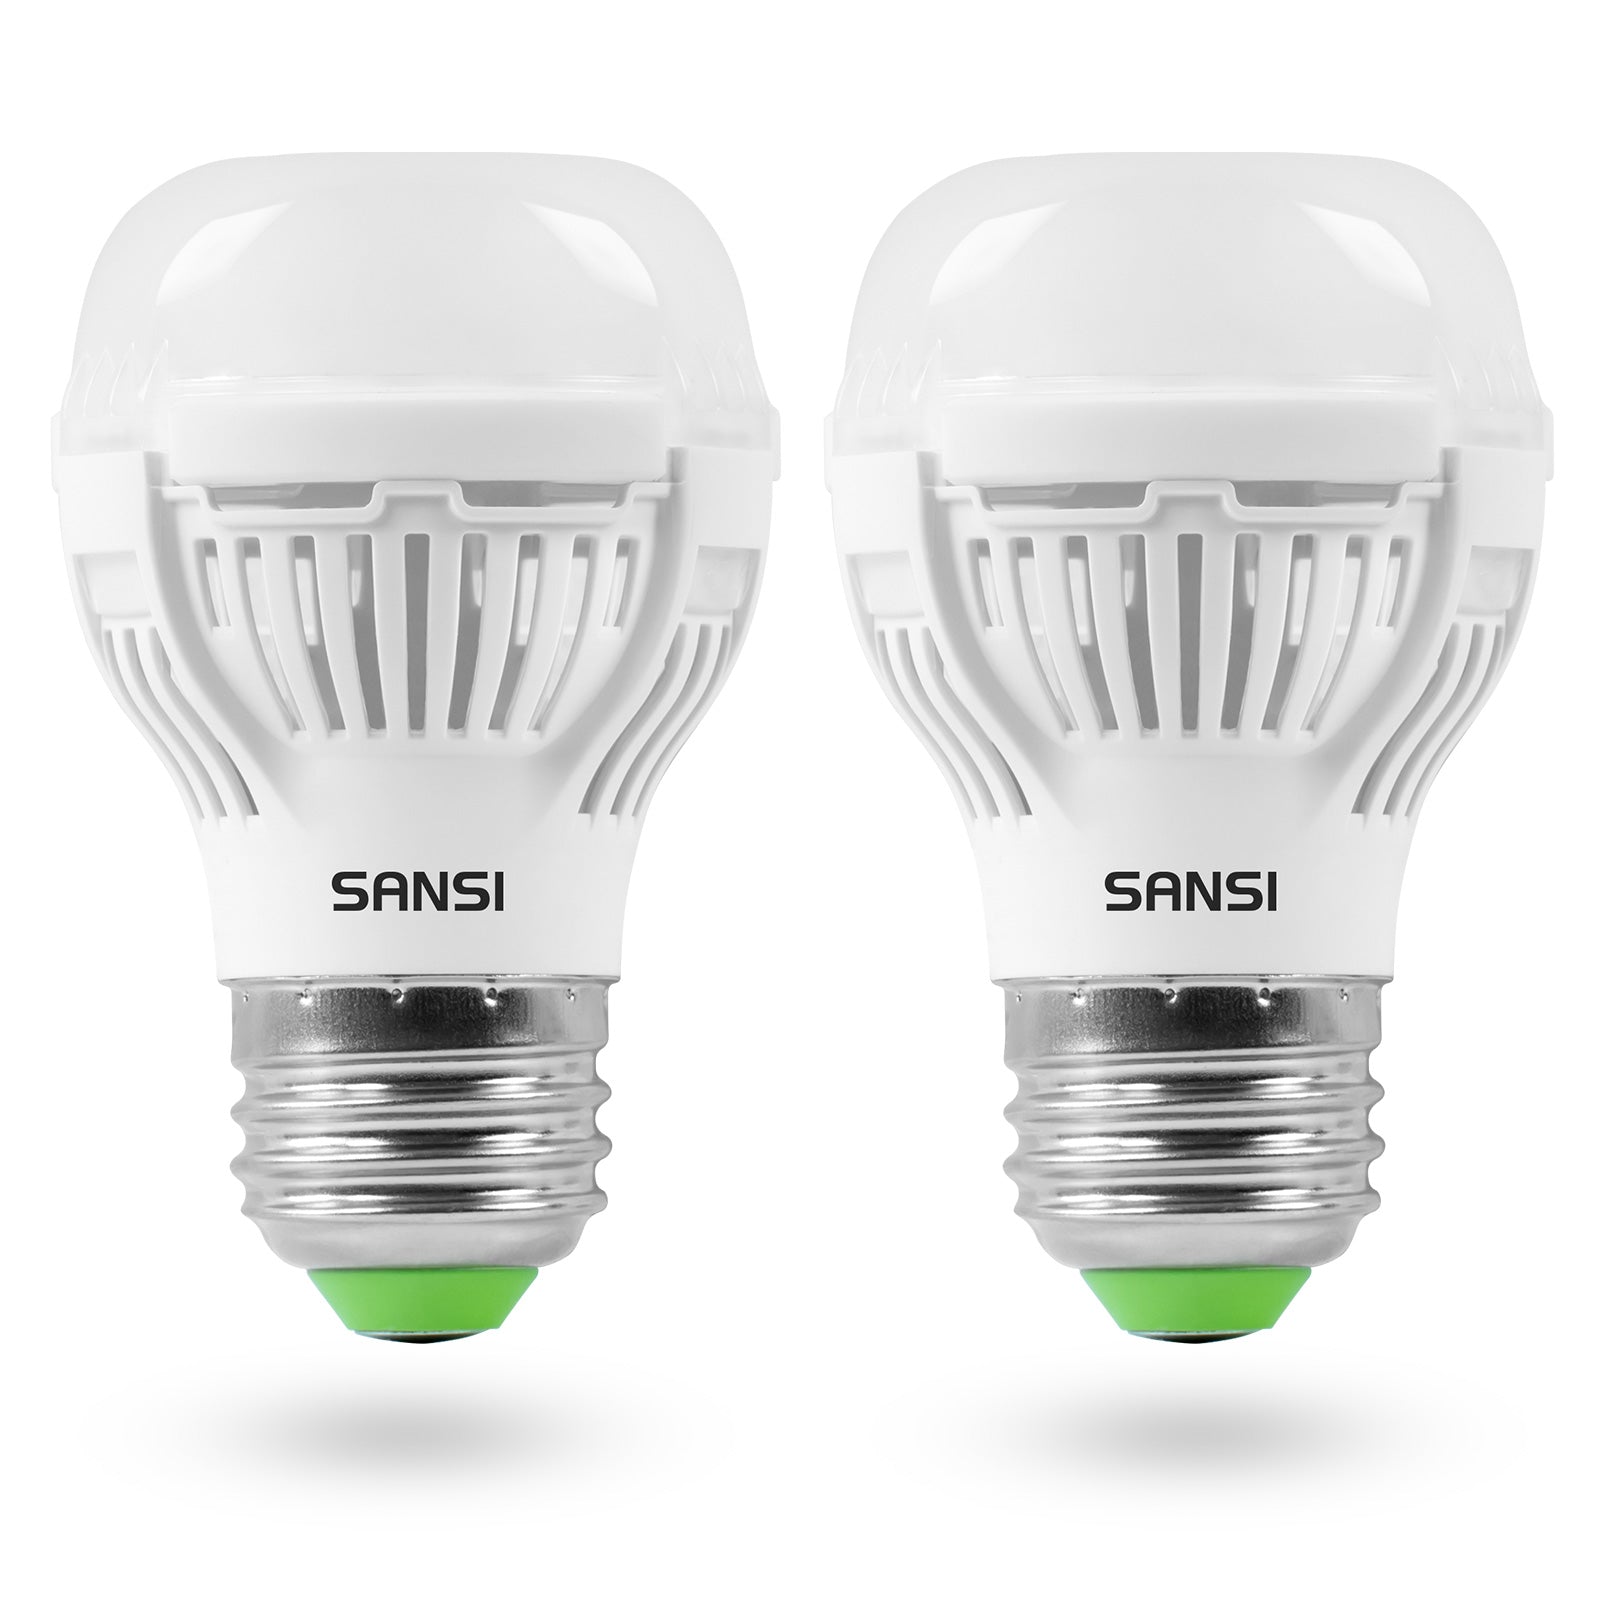 Upgraded A15 9W led light bulb with Flicker-Free for your home, 2 pack